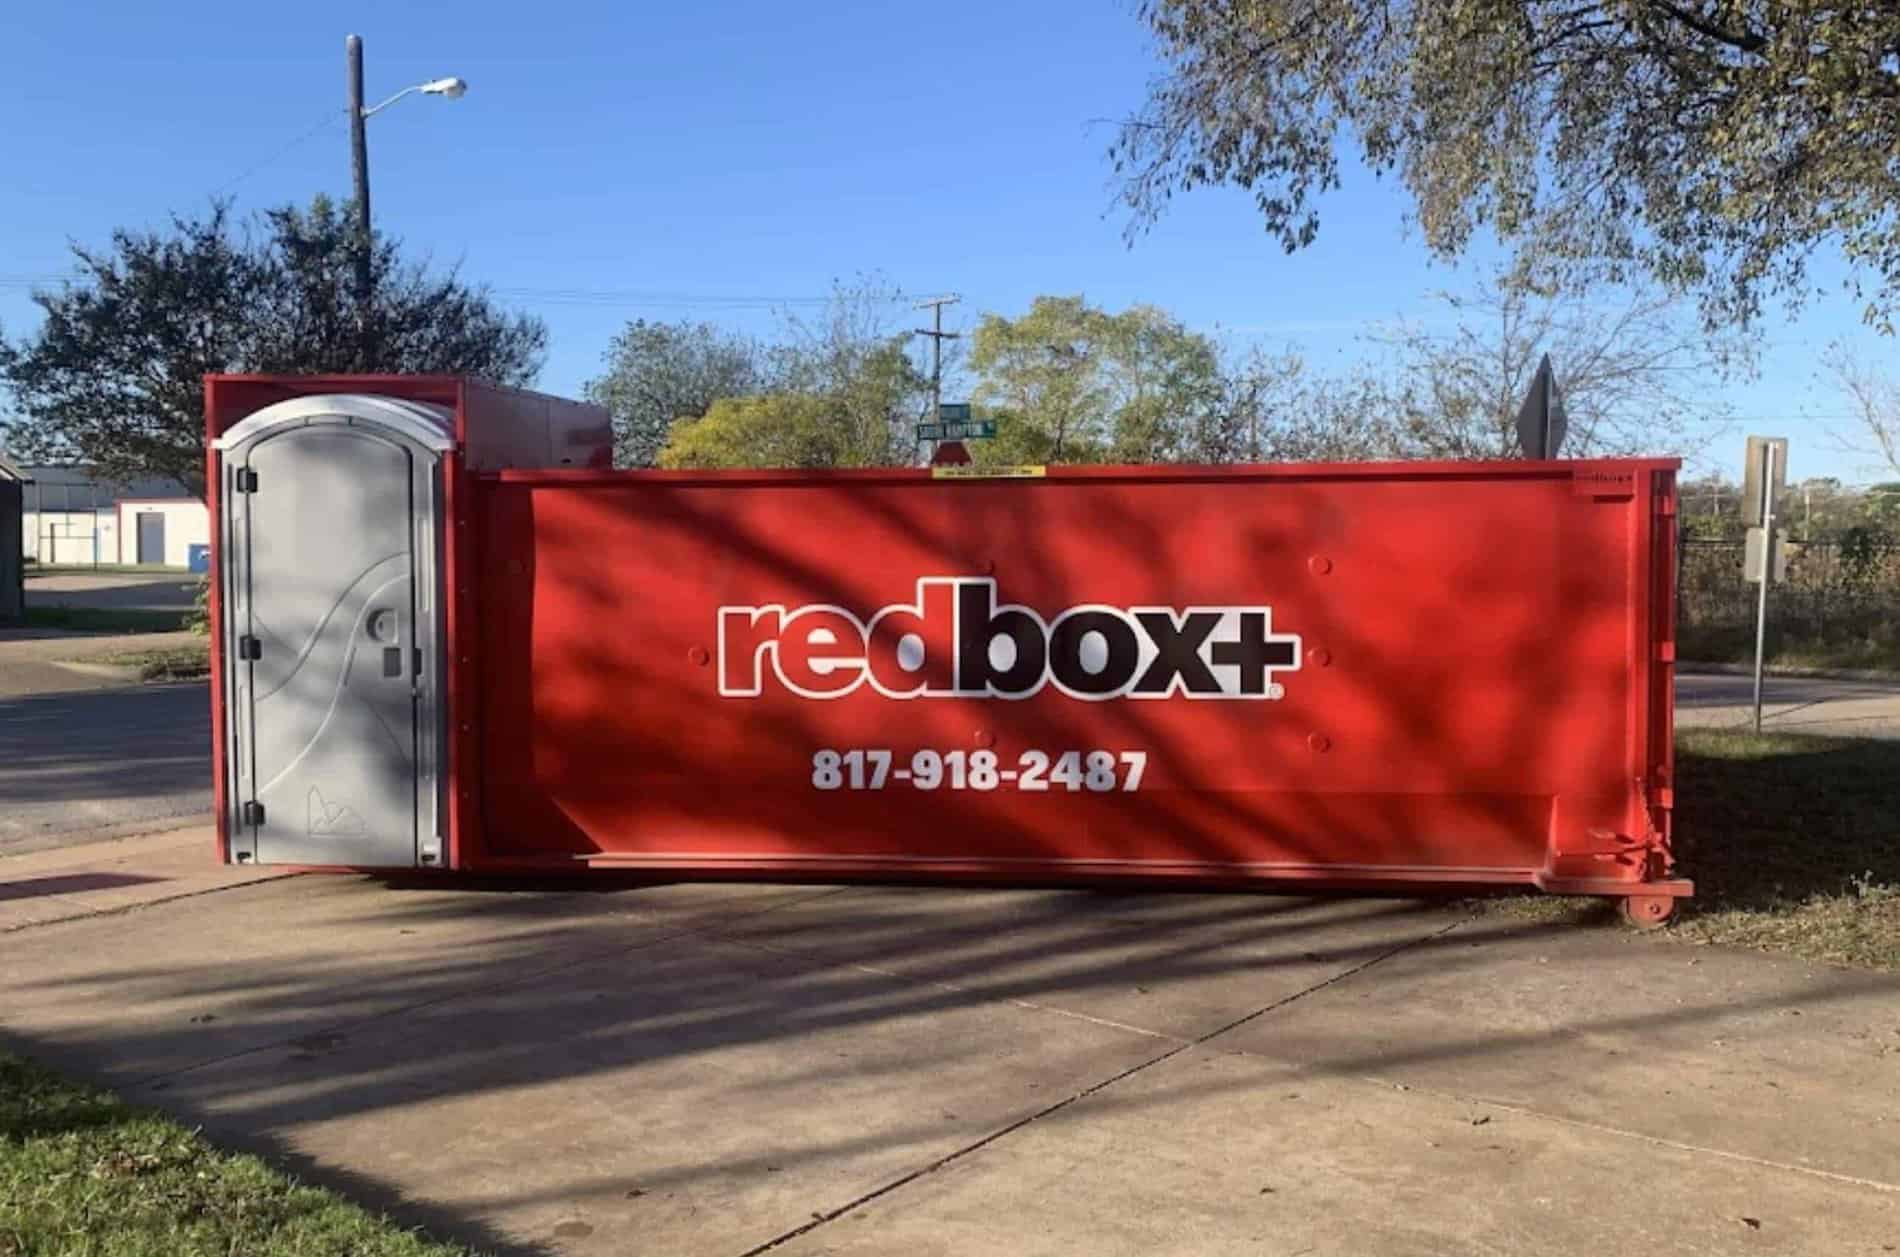 30 yard roll off dumpster in fort worth